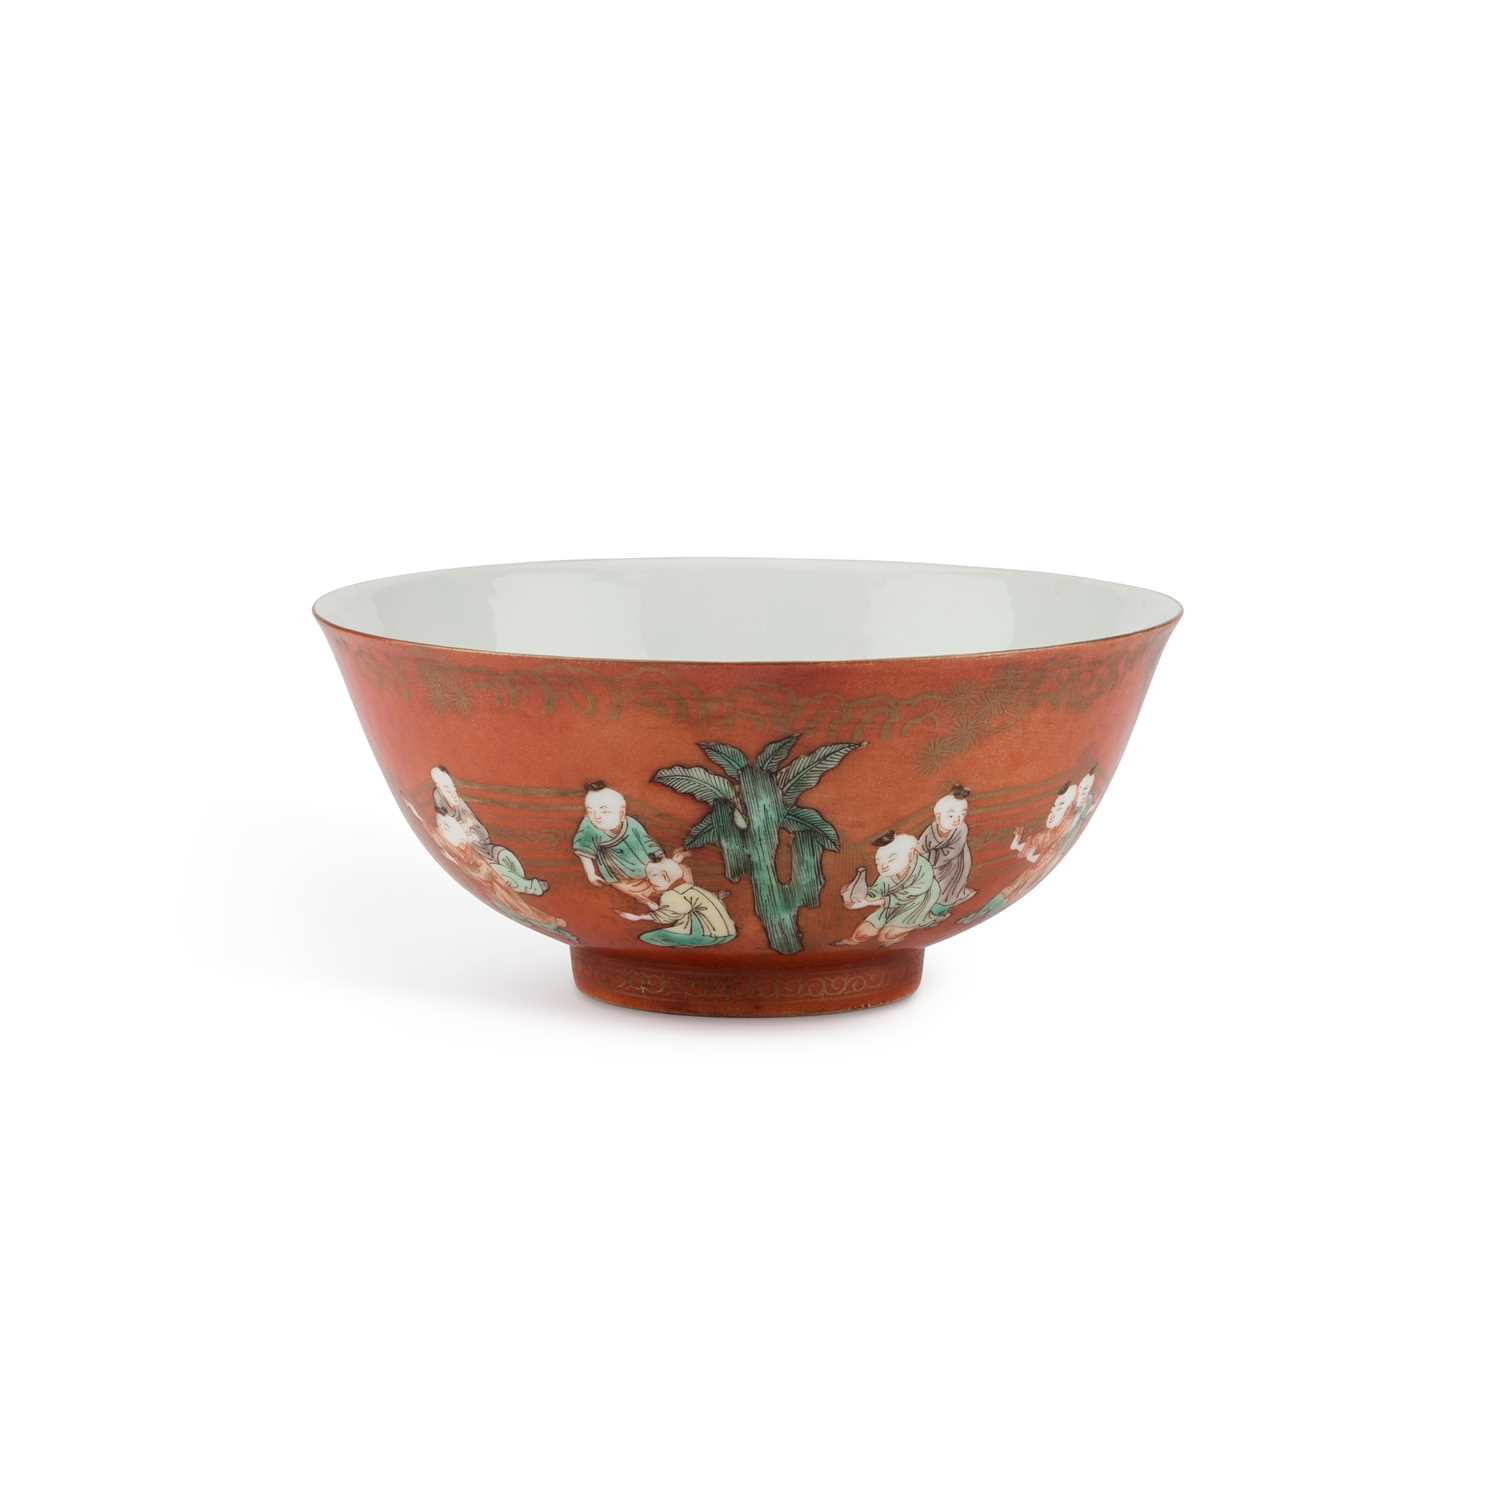 A CHINESE CORAL-GROUND FAMILLE VERTE 'BOYS' BOWL